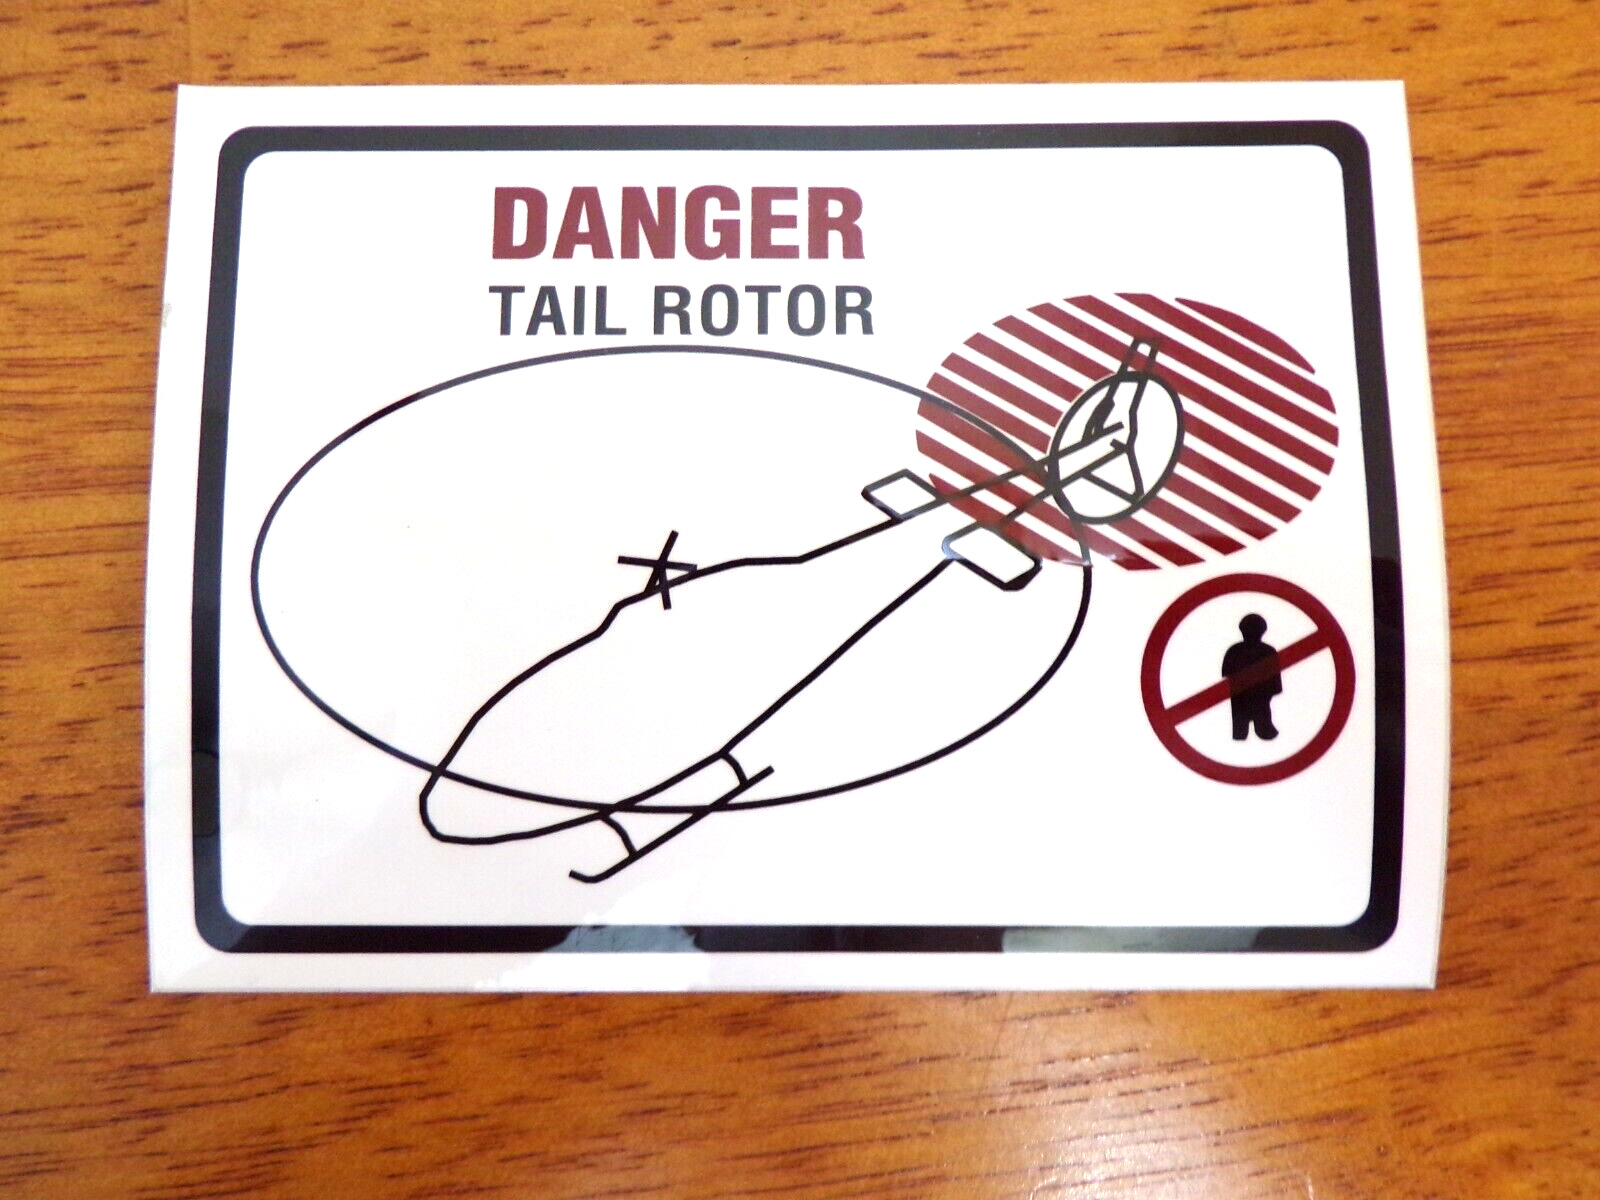 Helicopter Tail Rotor Danger Decal